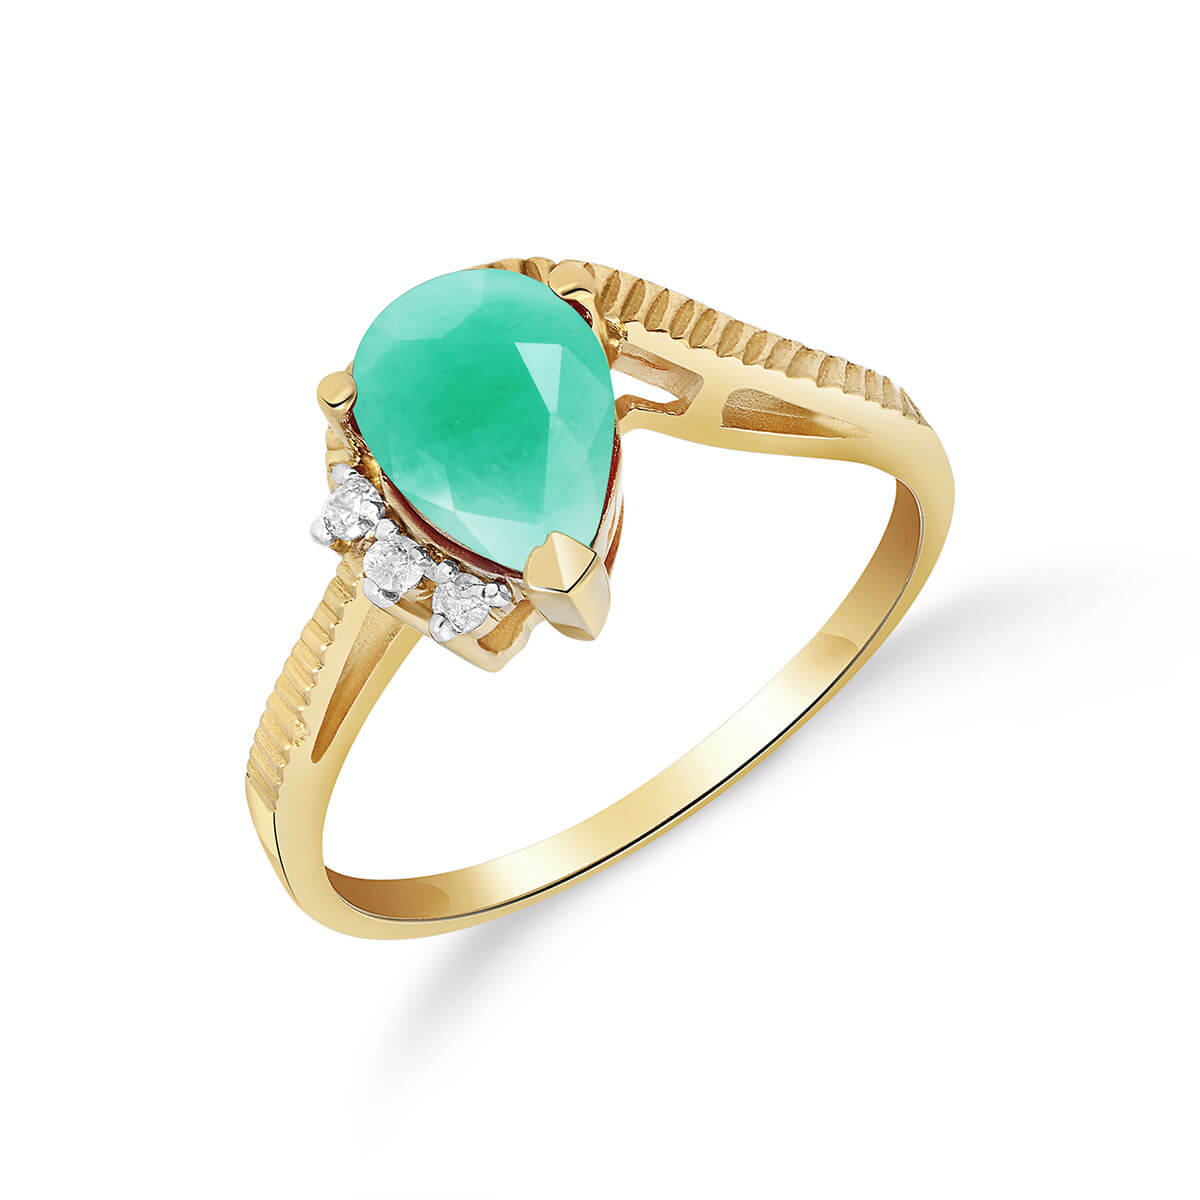 Emerald & Diamond Belle Ring in 18ct Gold